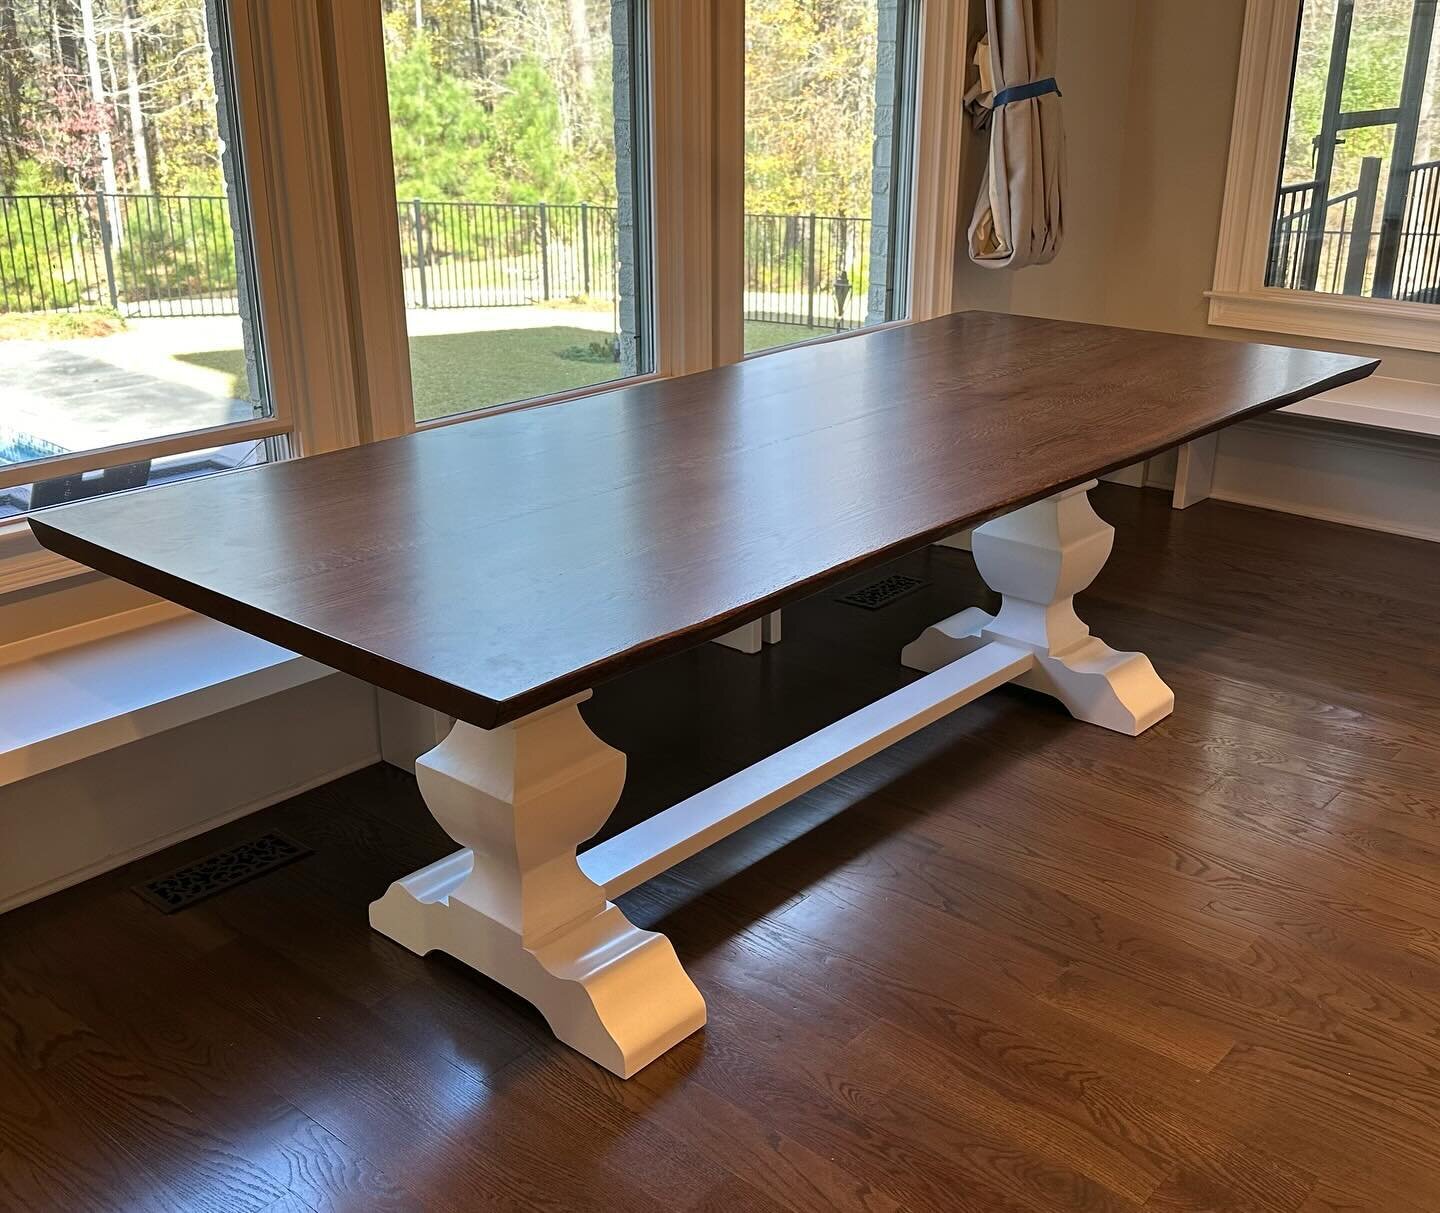 White oak live edge top stained to match the clients floors and a classy curved carved pedestal base 👌👌
&bull;
If you&rsquo;re looking for a new dining table, we offer shipping nationwide wide! Click the link below or in our bio to get started 🪵🪵